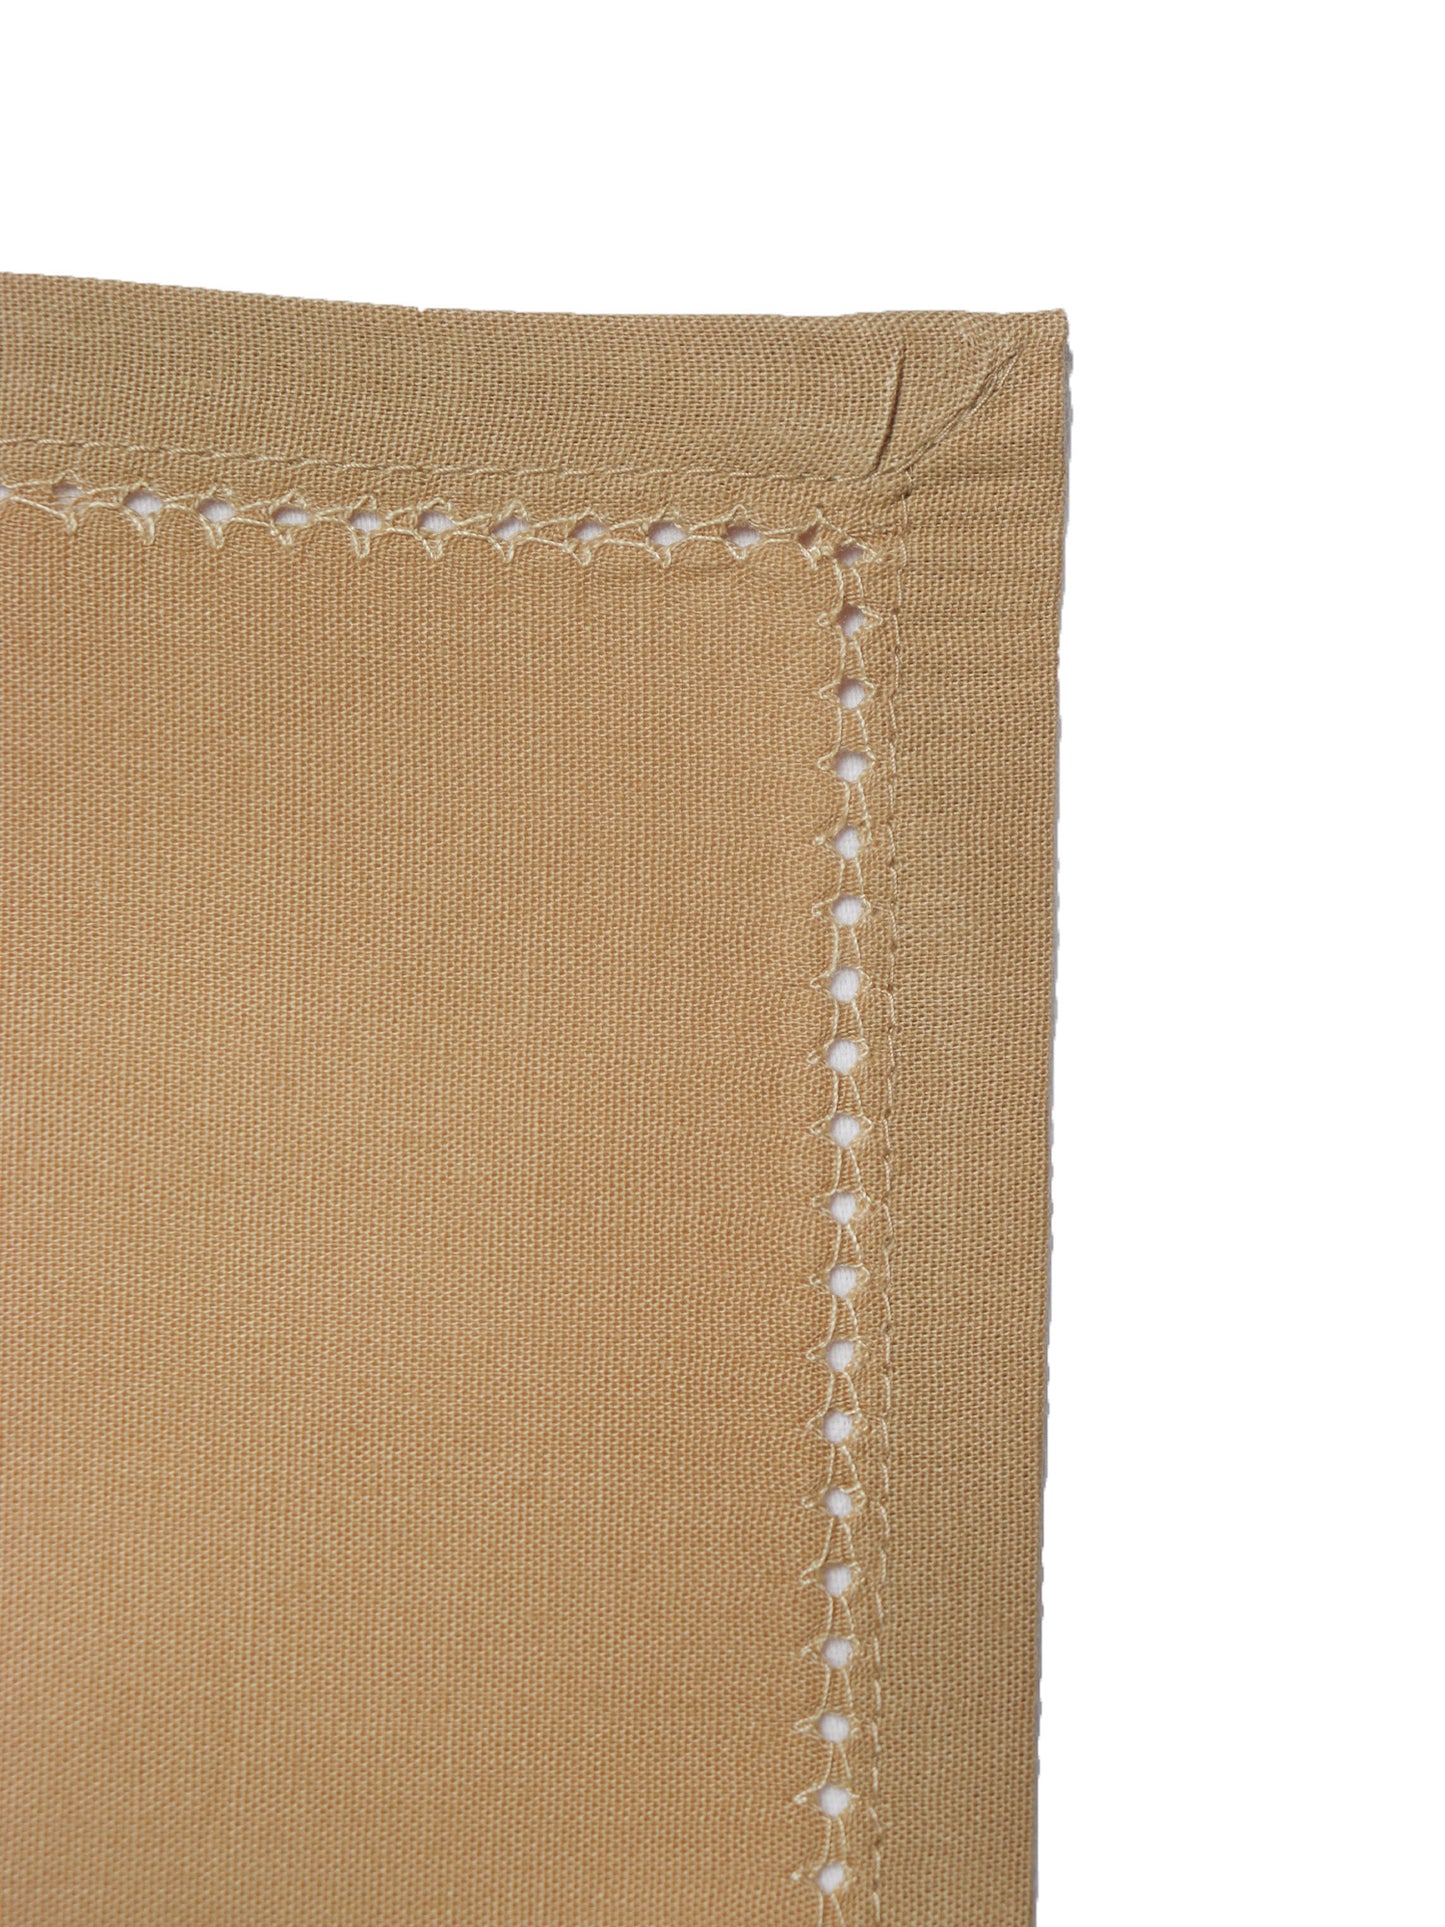 closeup of fagotting embroidered set of 6 dinner napkins in beige color - 16x16 inch